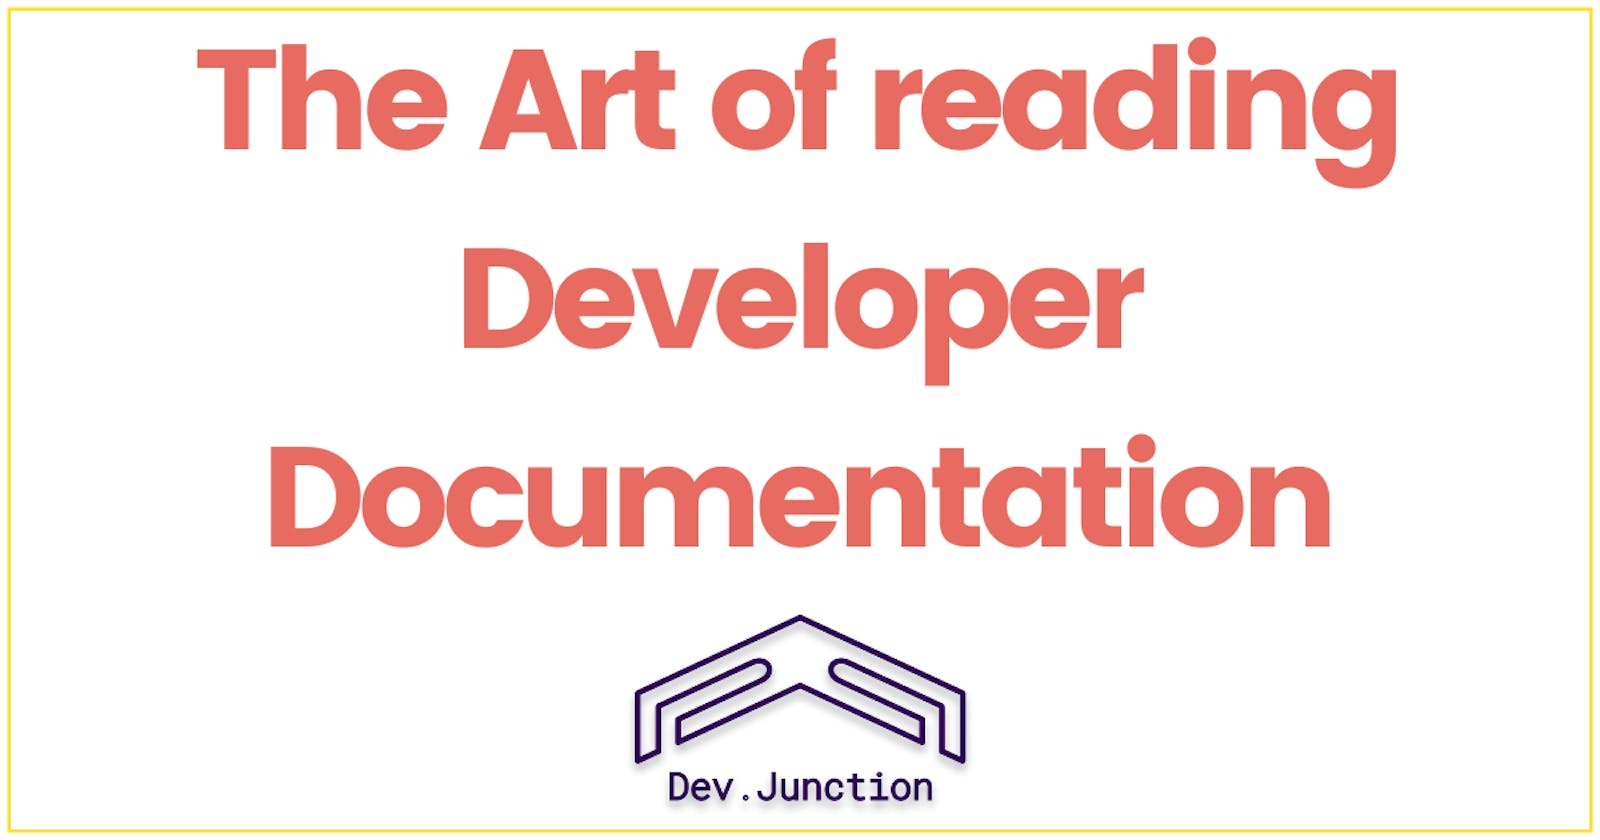 5 Tips to read the developer documentation like a pro